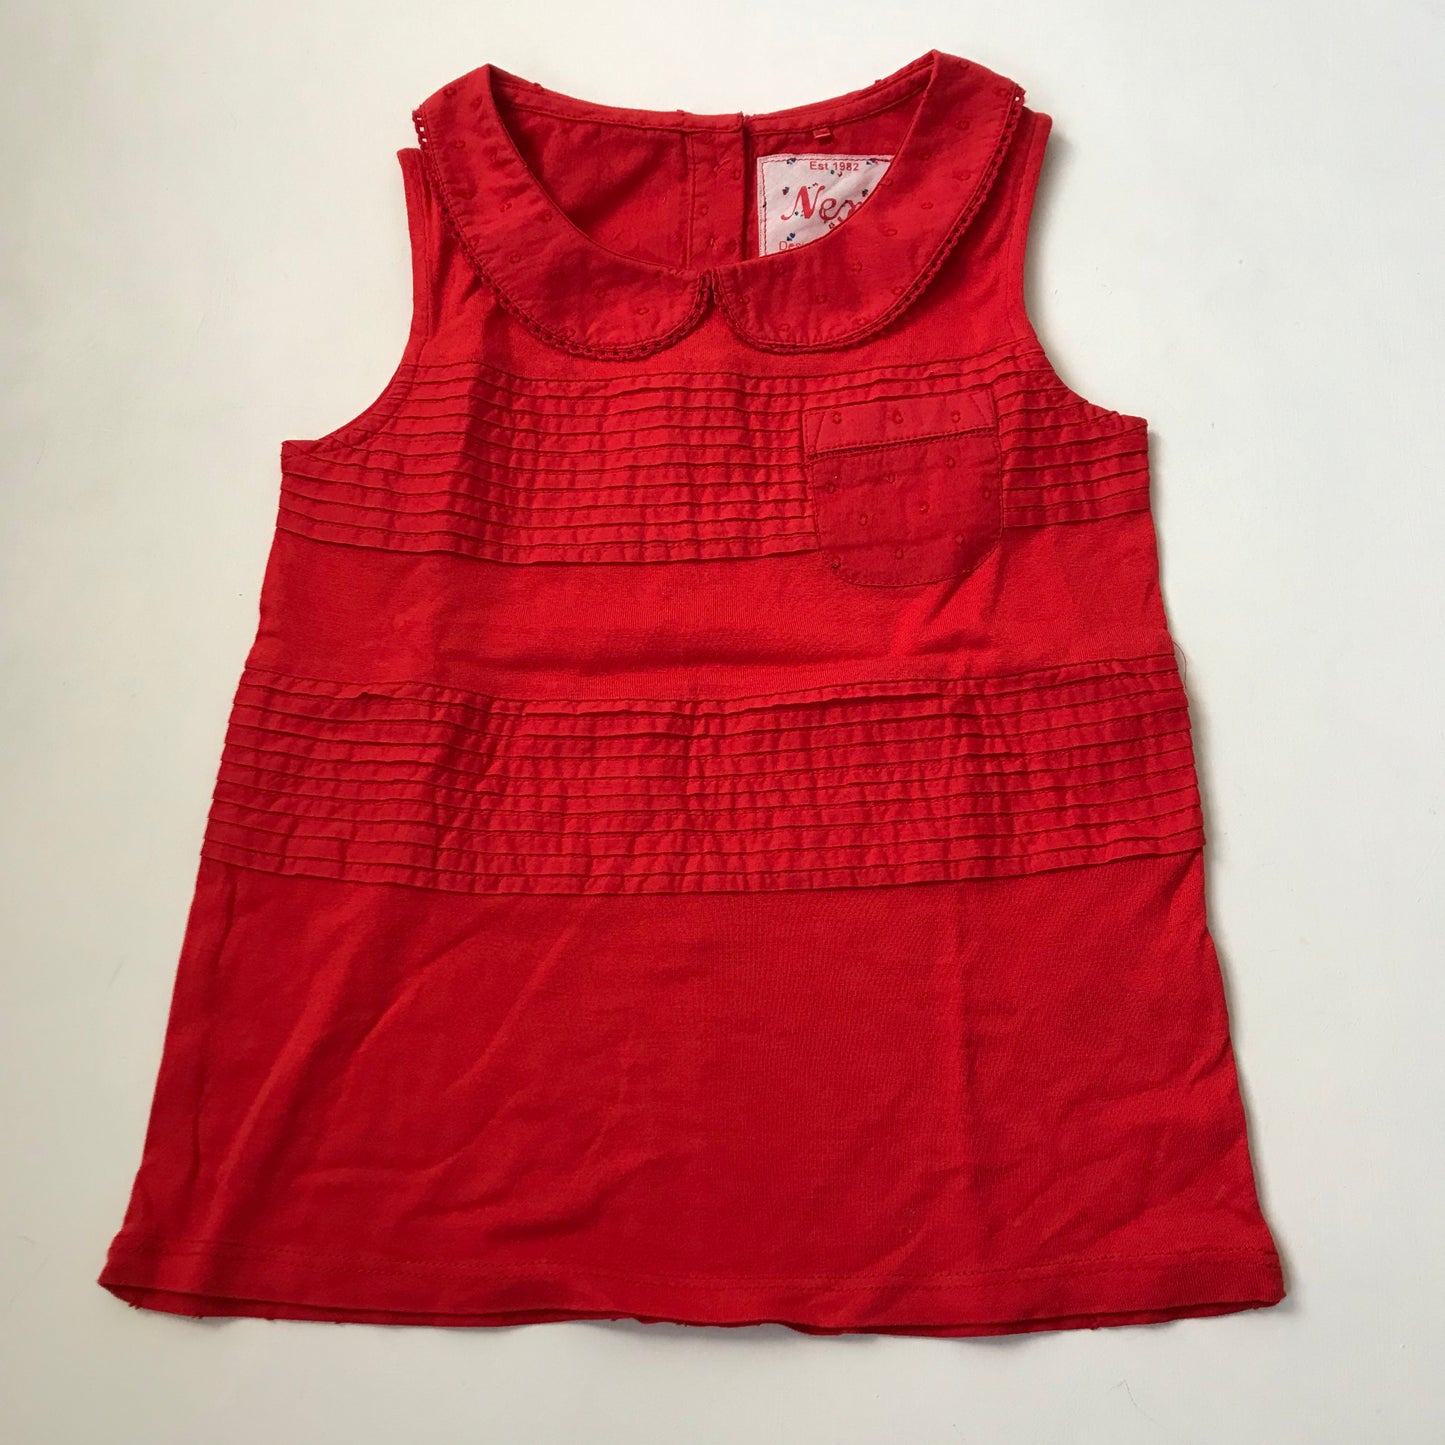 Next Red Sleeveless Collared Top Age 5